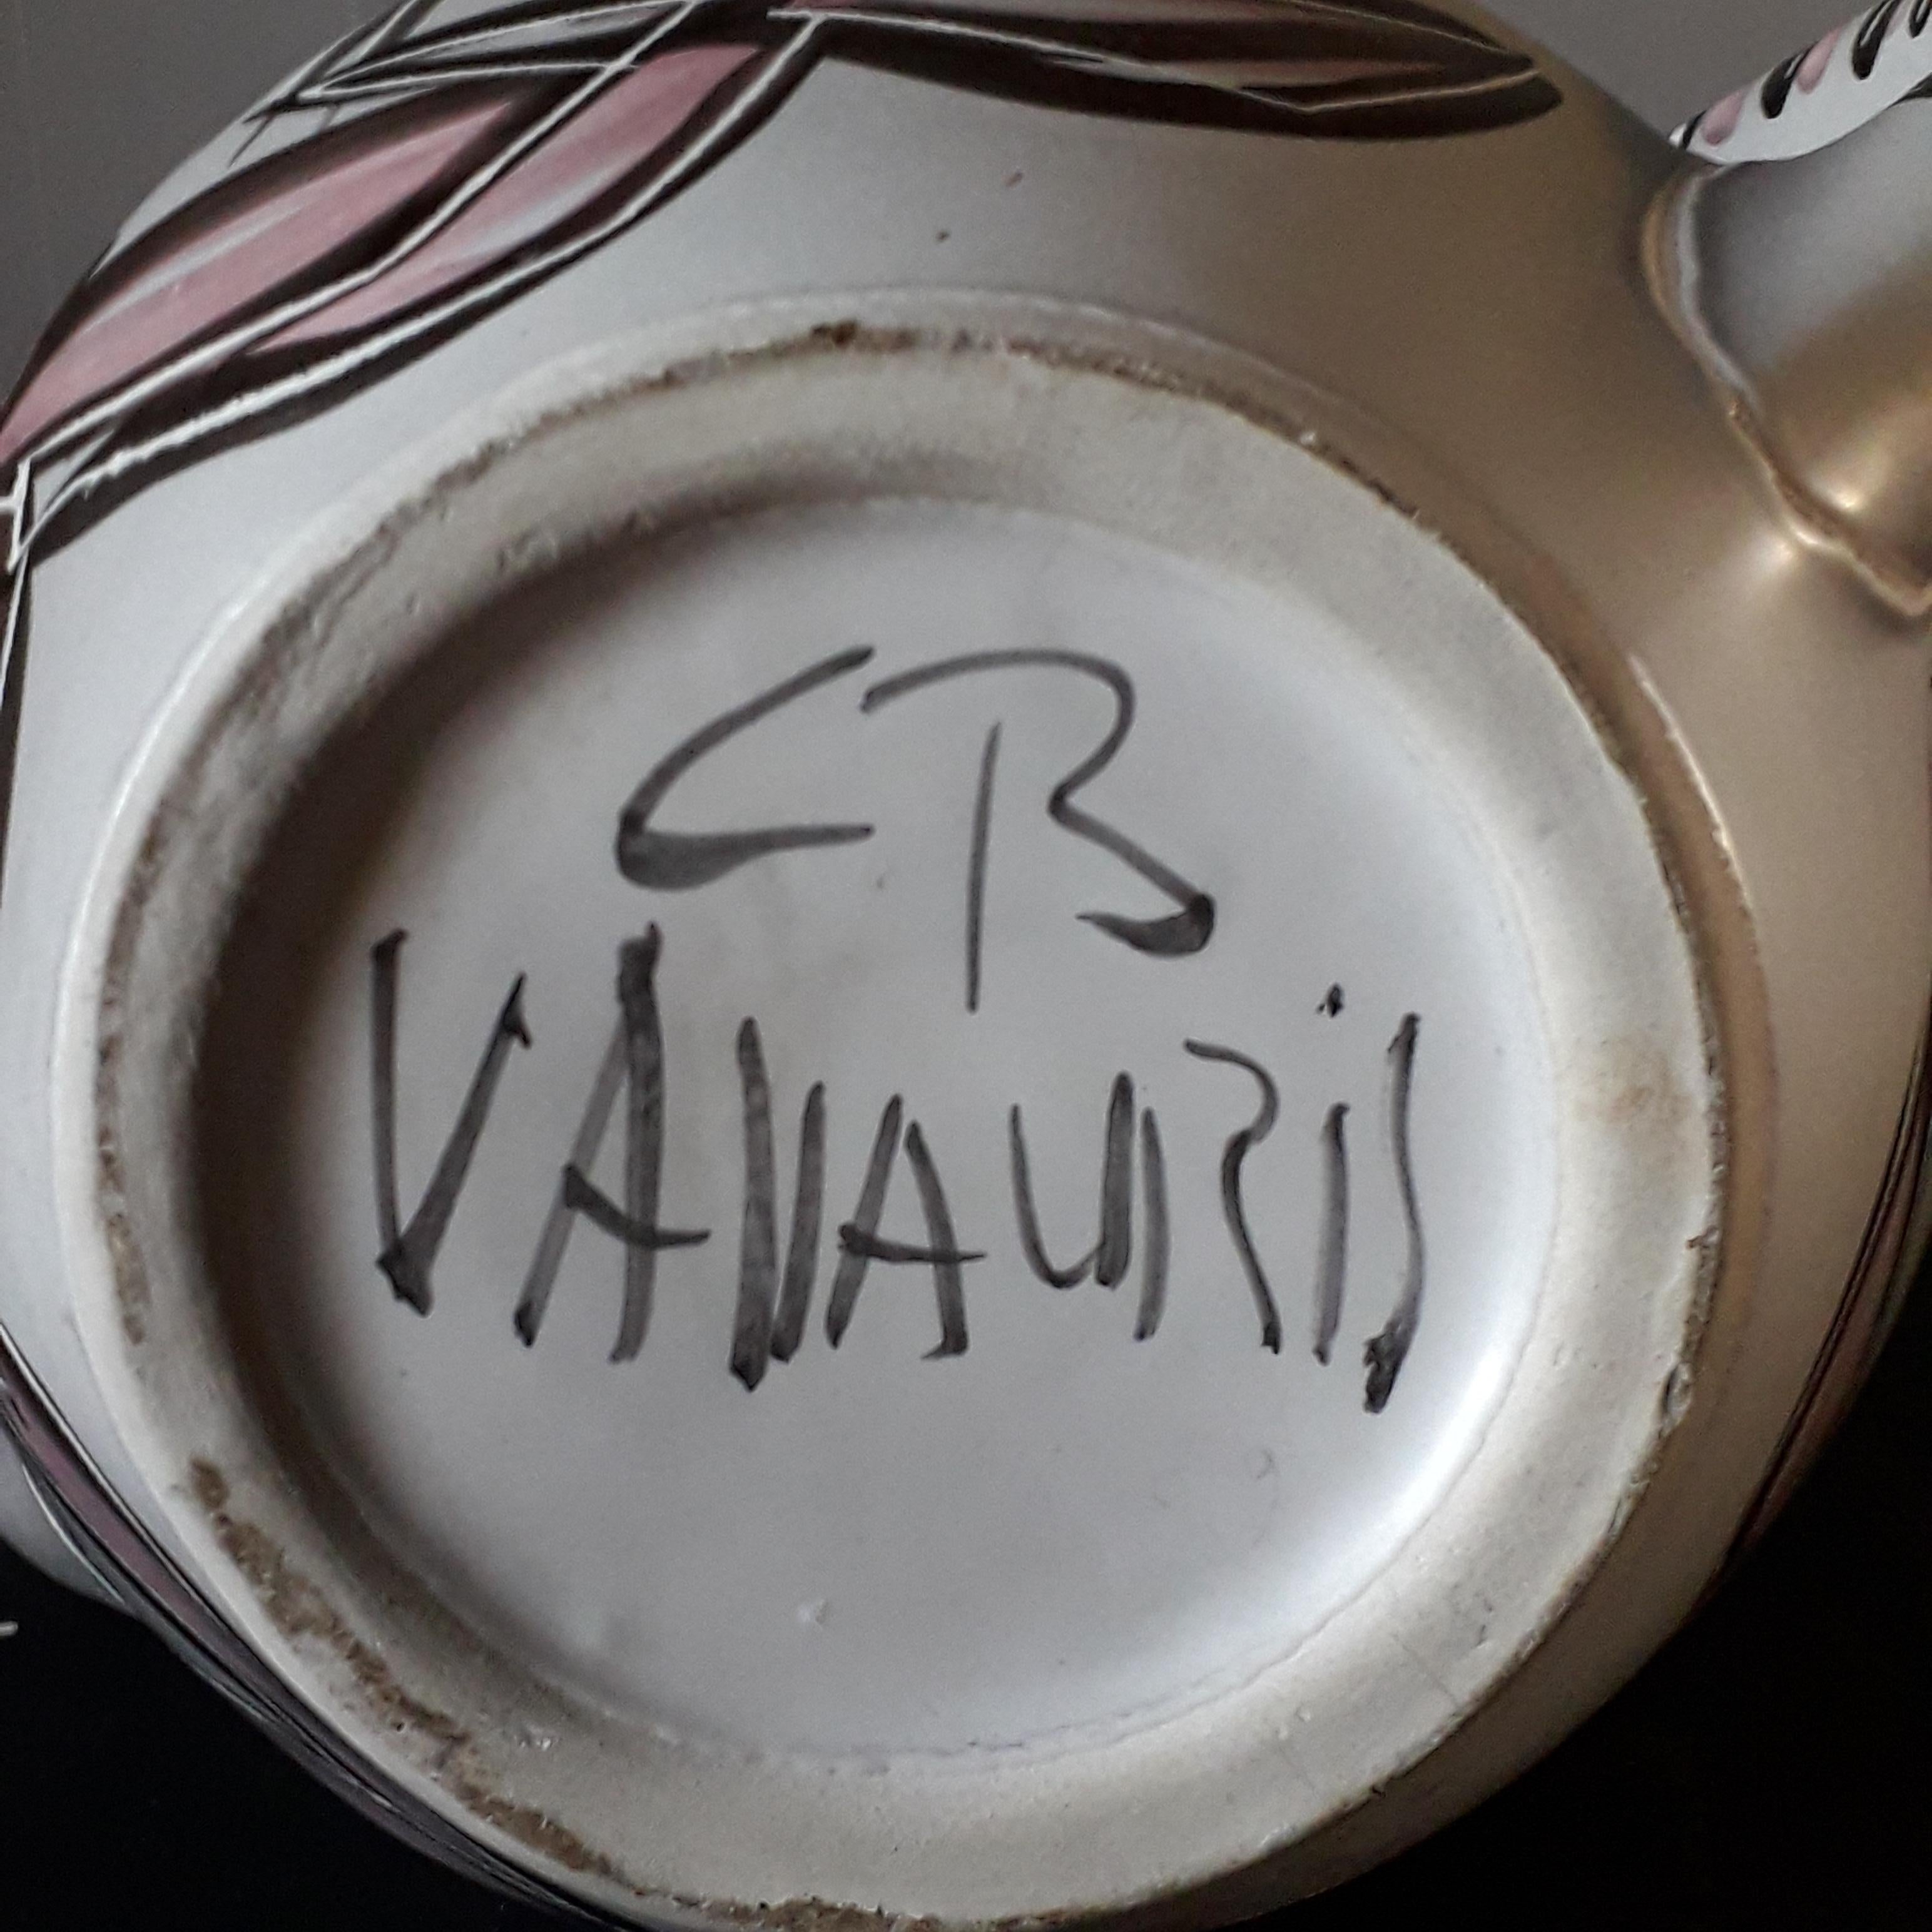 Ceramic Vase Vallauris France, 21st Century In Excellent Condition For Sale In Longueil, FR